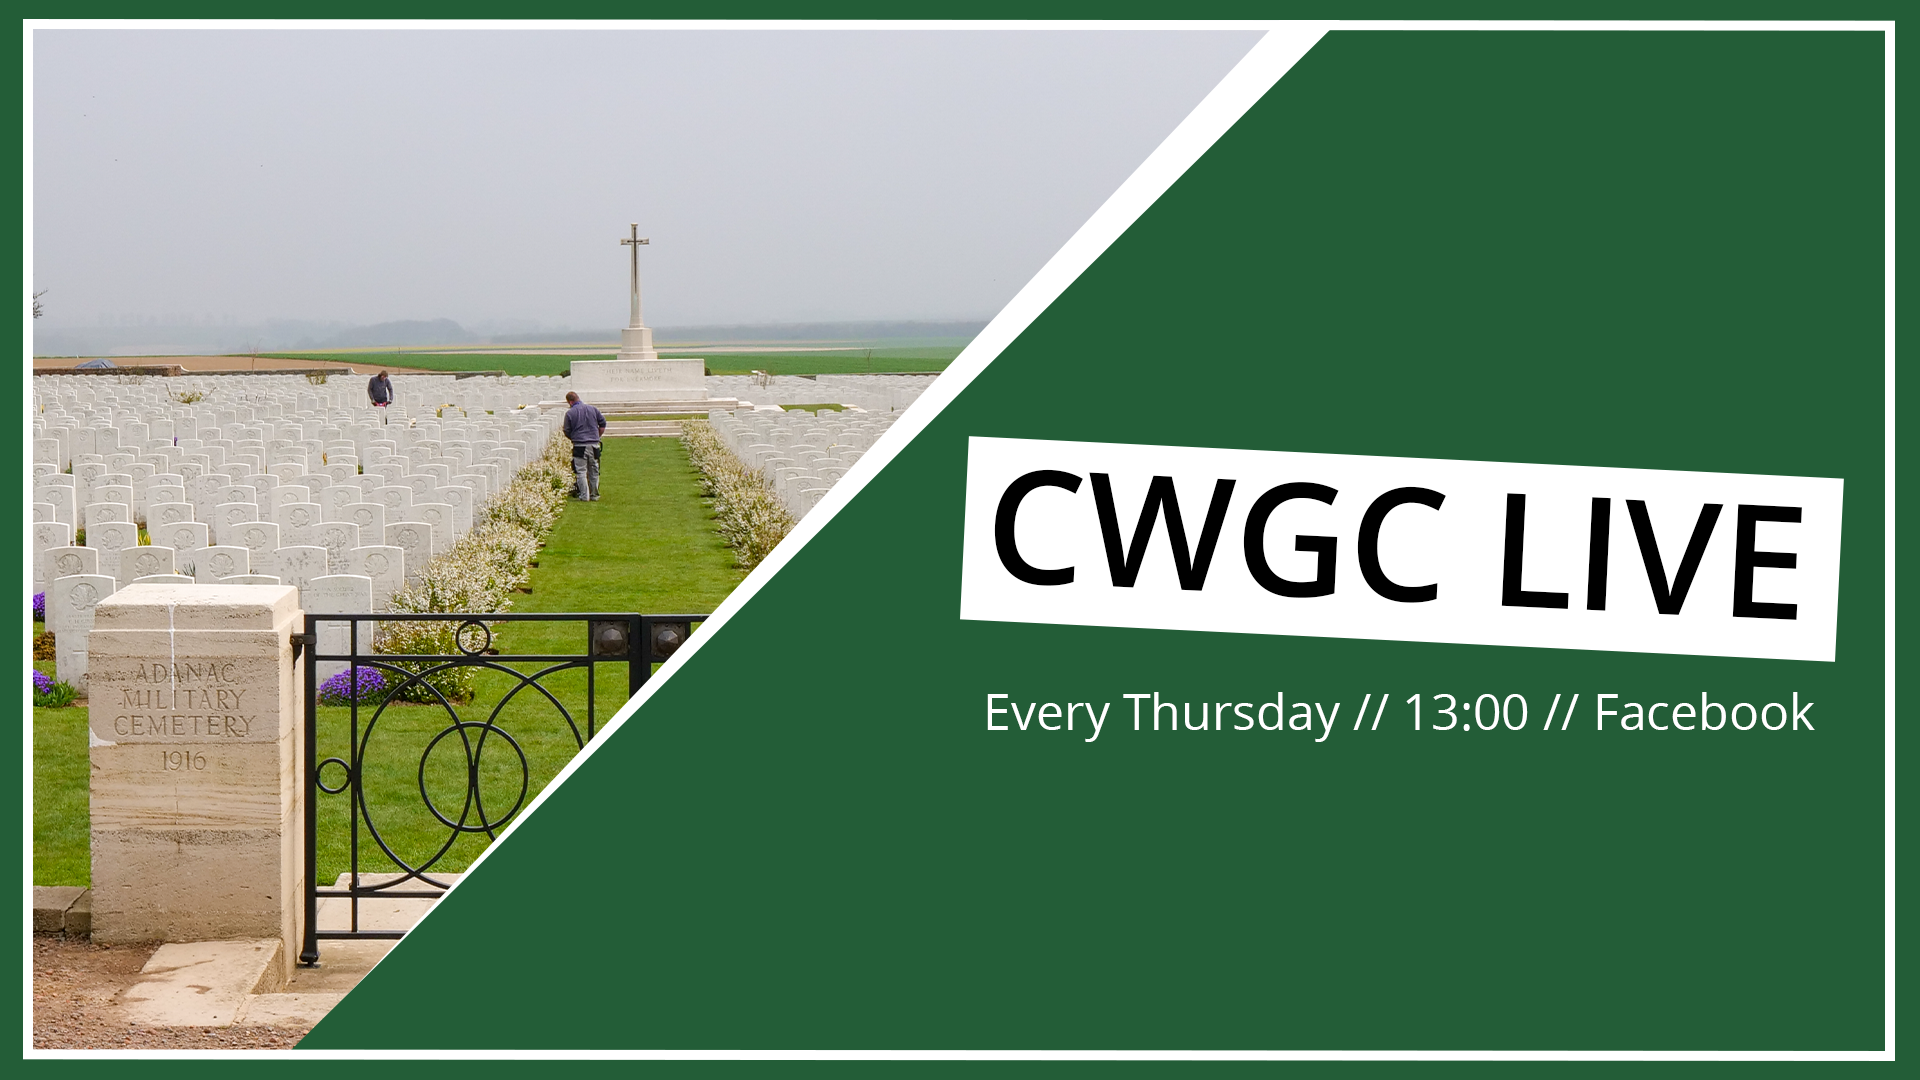 Watch the rest of our CWGC Live episodes